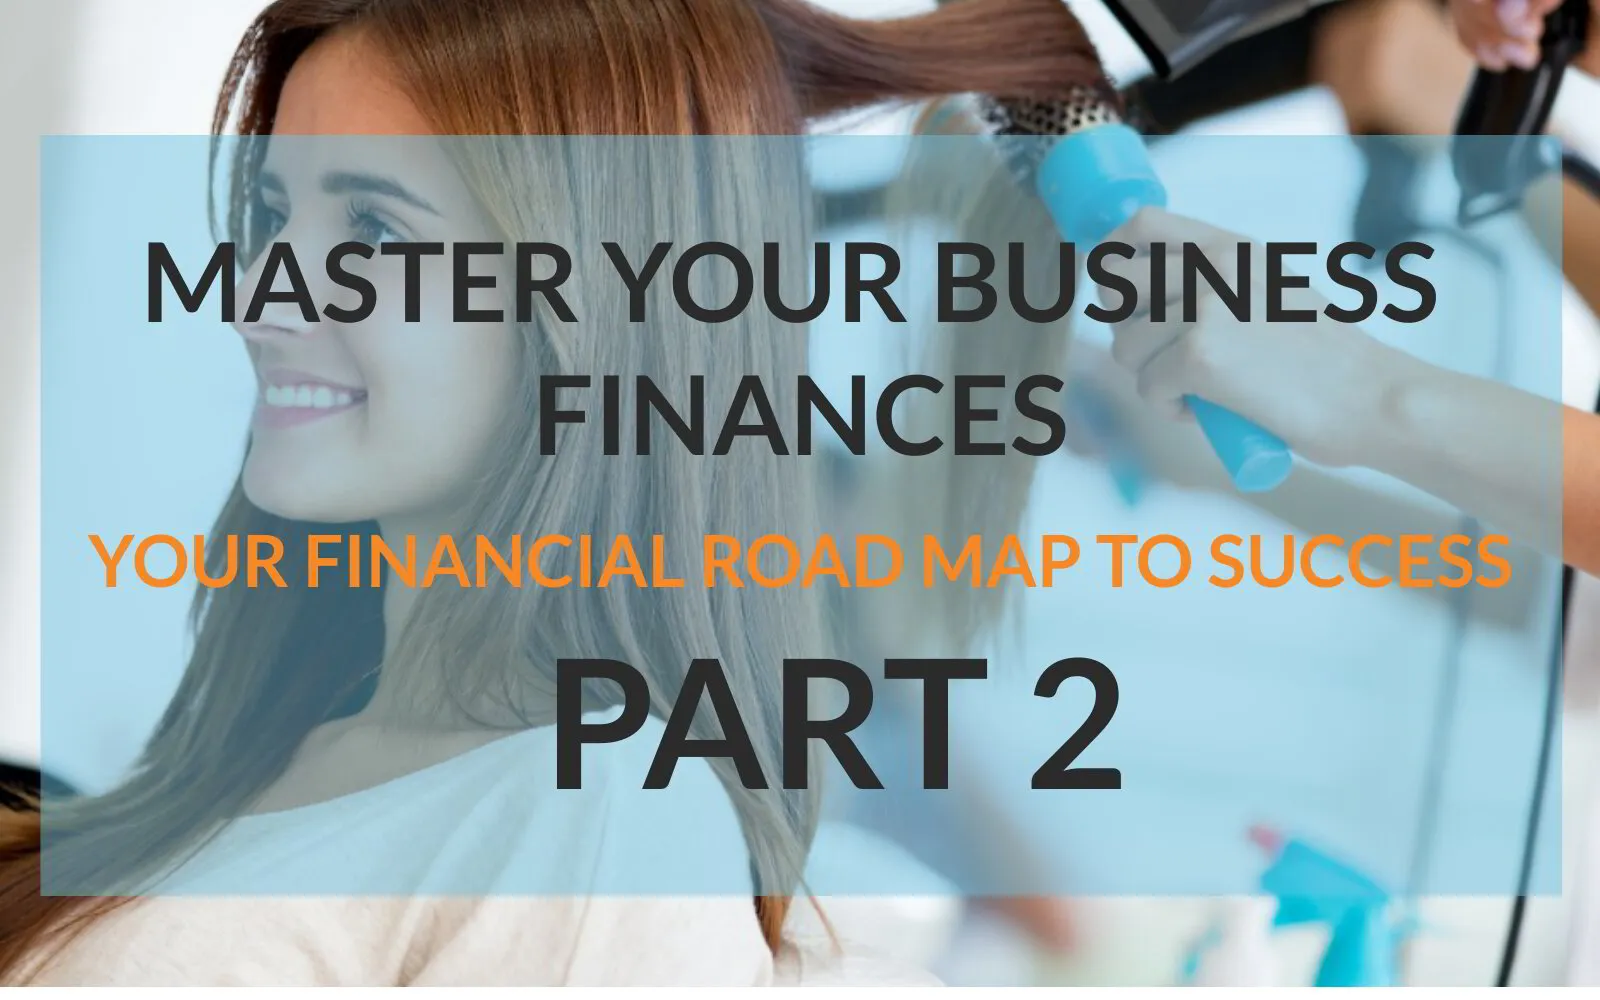 Master Your Business Finances: Your Financial Road Map To Success PART 2